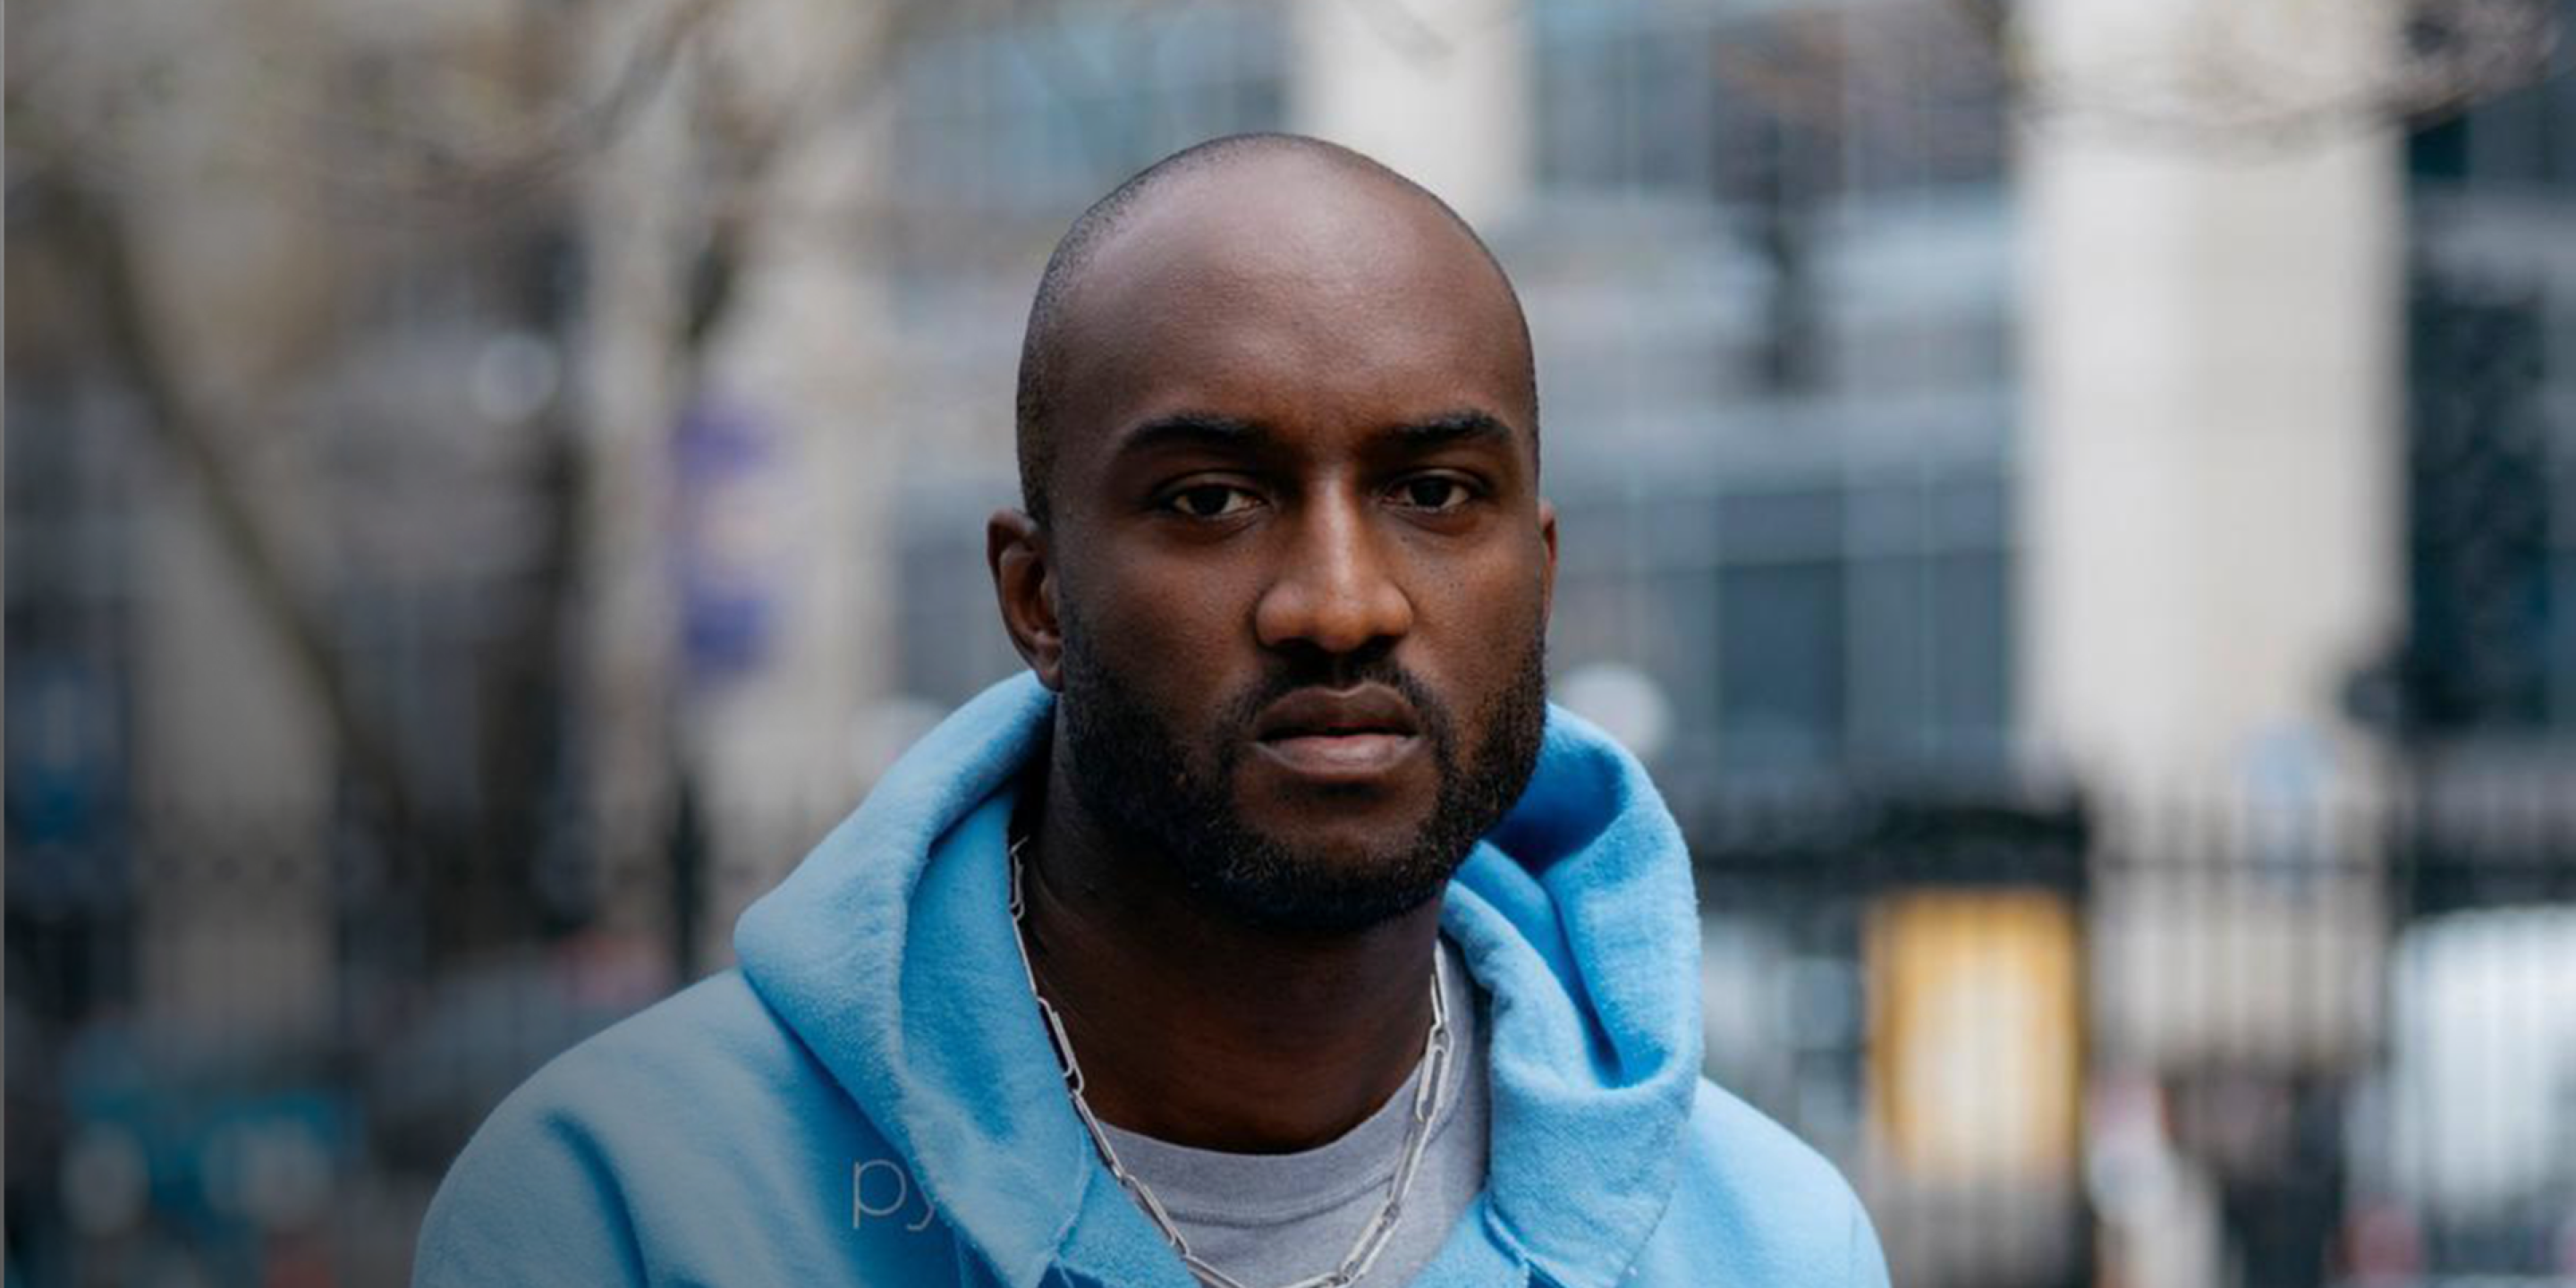 Braun Marks 100 Years of 'Good Design' With Virgil Abloh